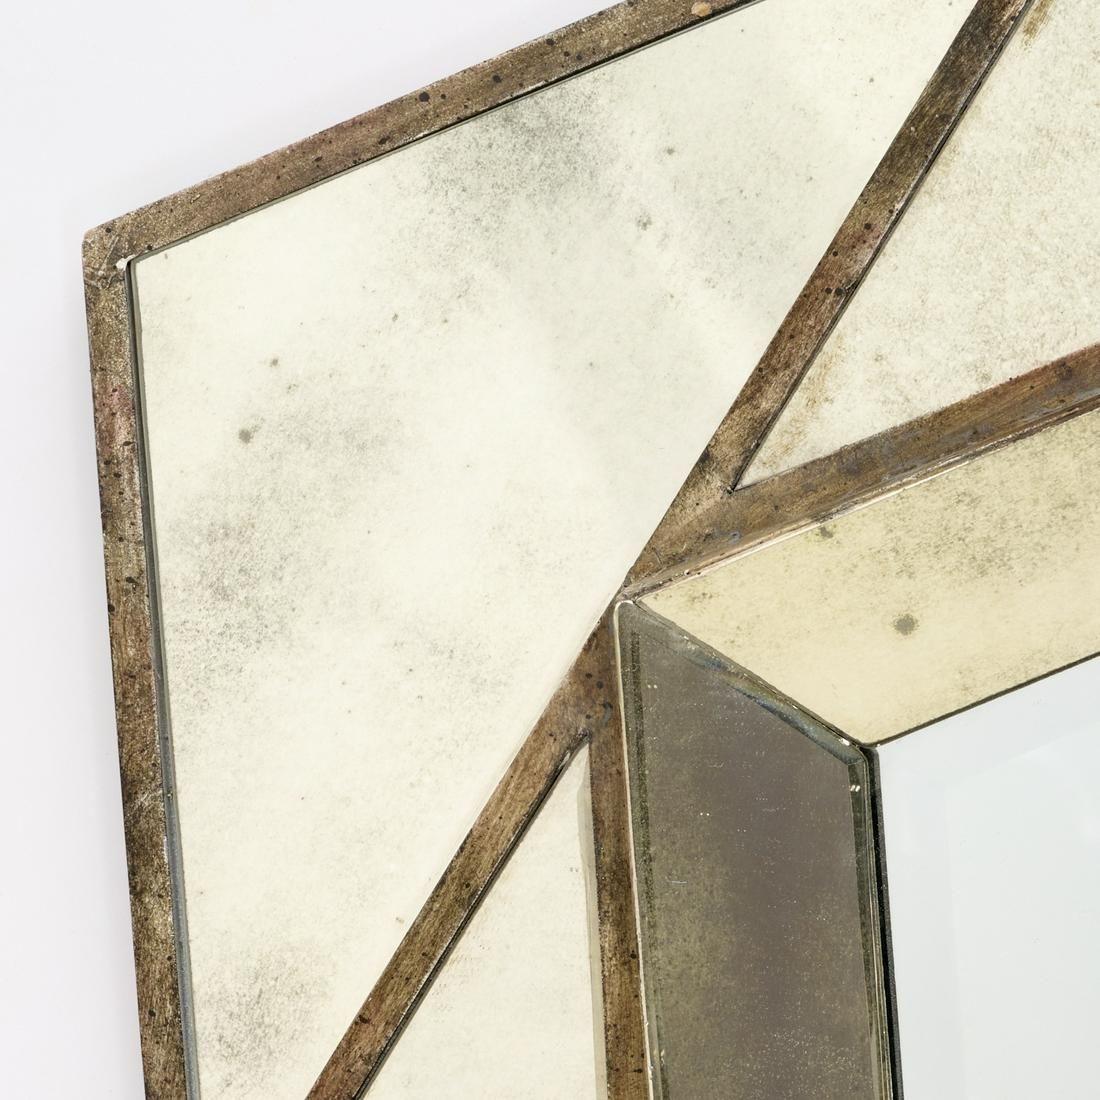 A geometric Venetian style beveled mirror with a faux antiqued finish.  The center mirror is a beveled pentagon surrounded by a double pentagon frame, one angled over the other creating a  dimensional geometric star shape.  Center mirror measures